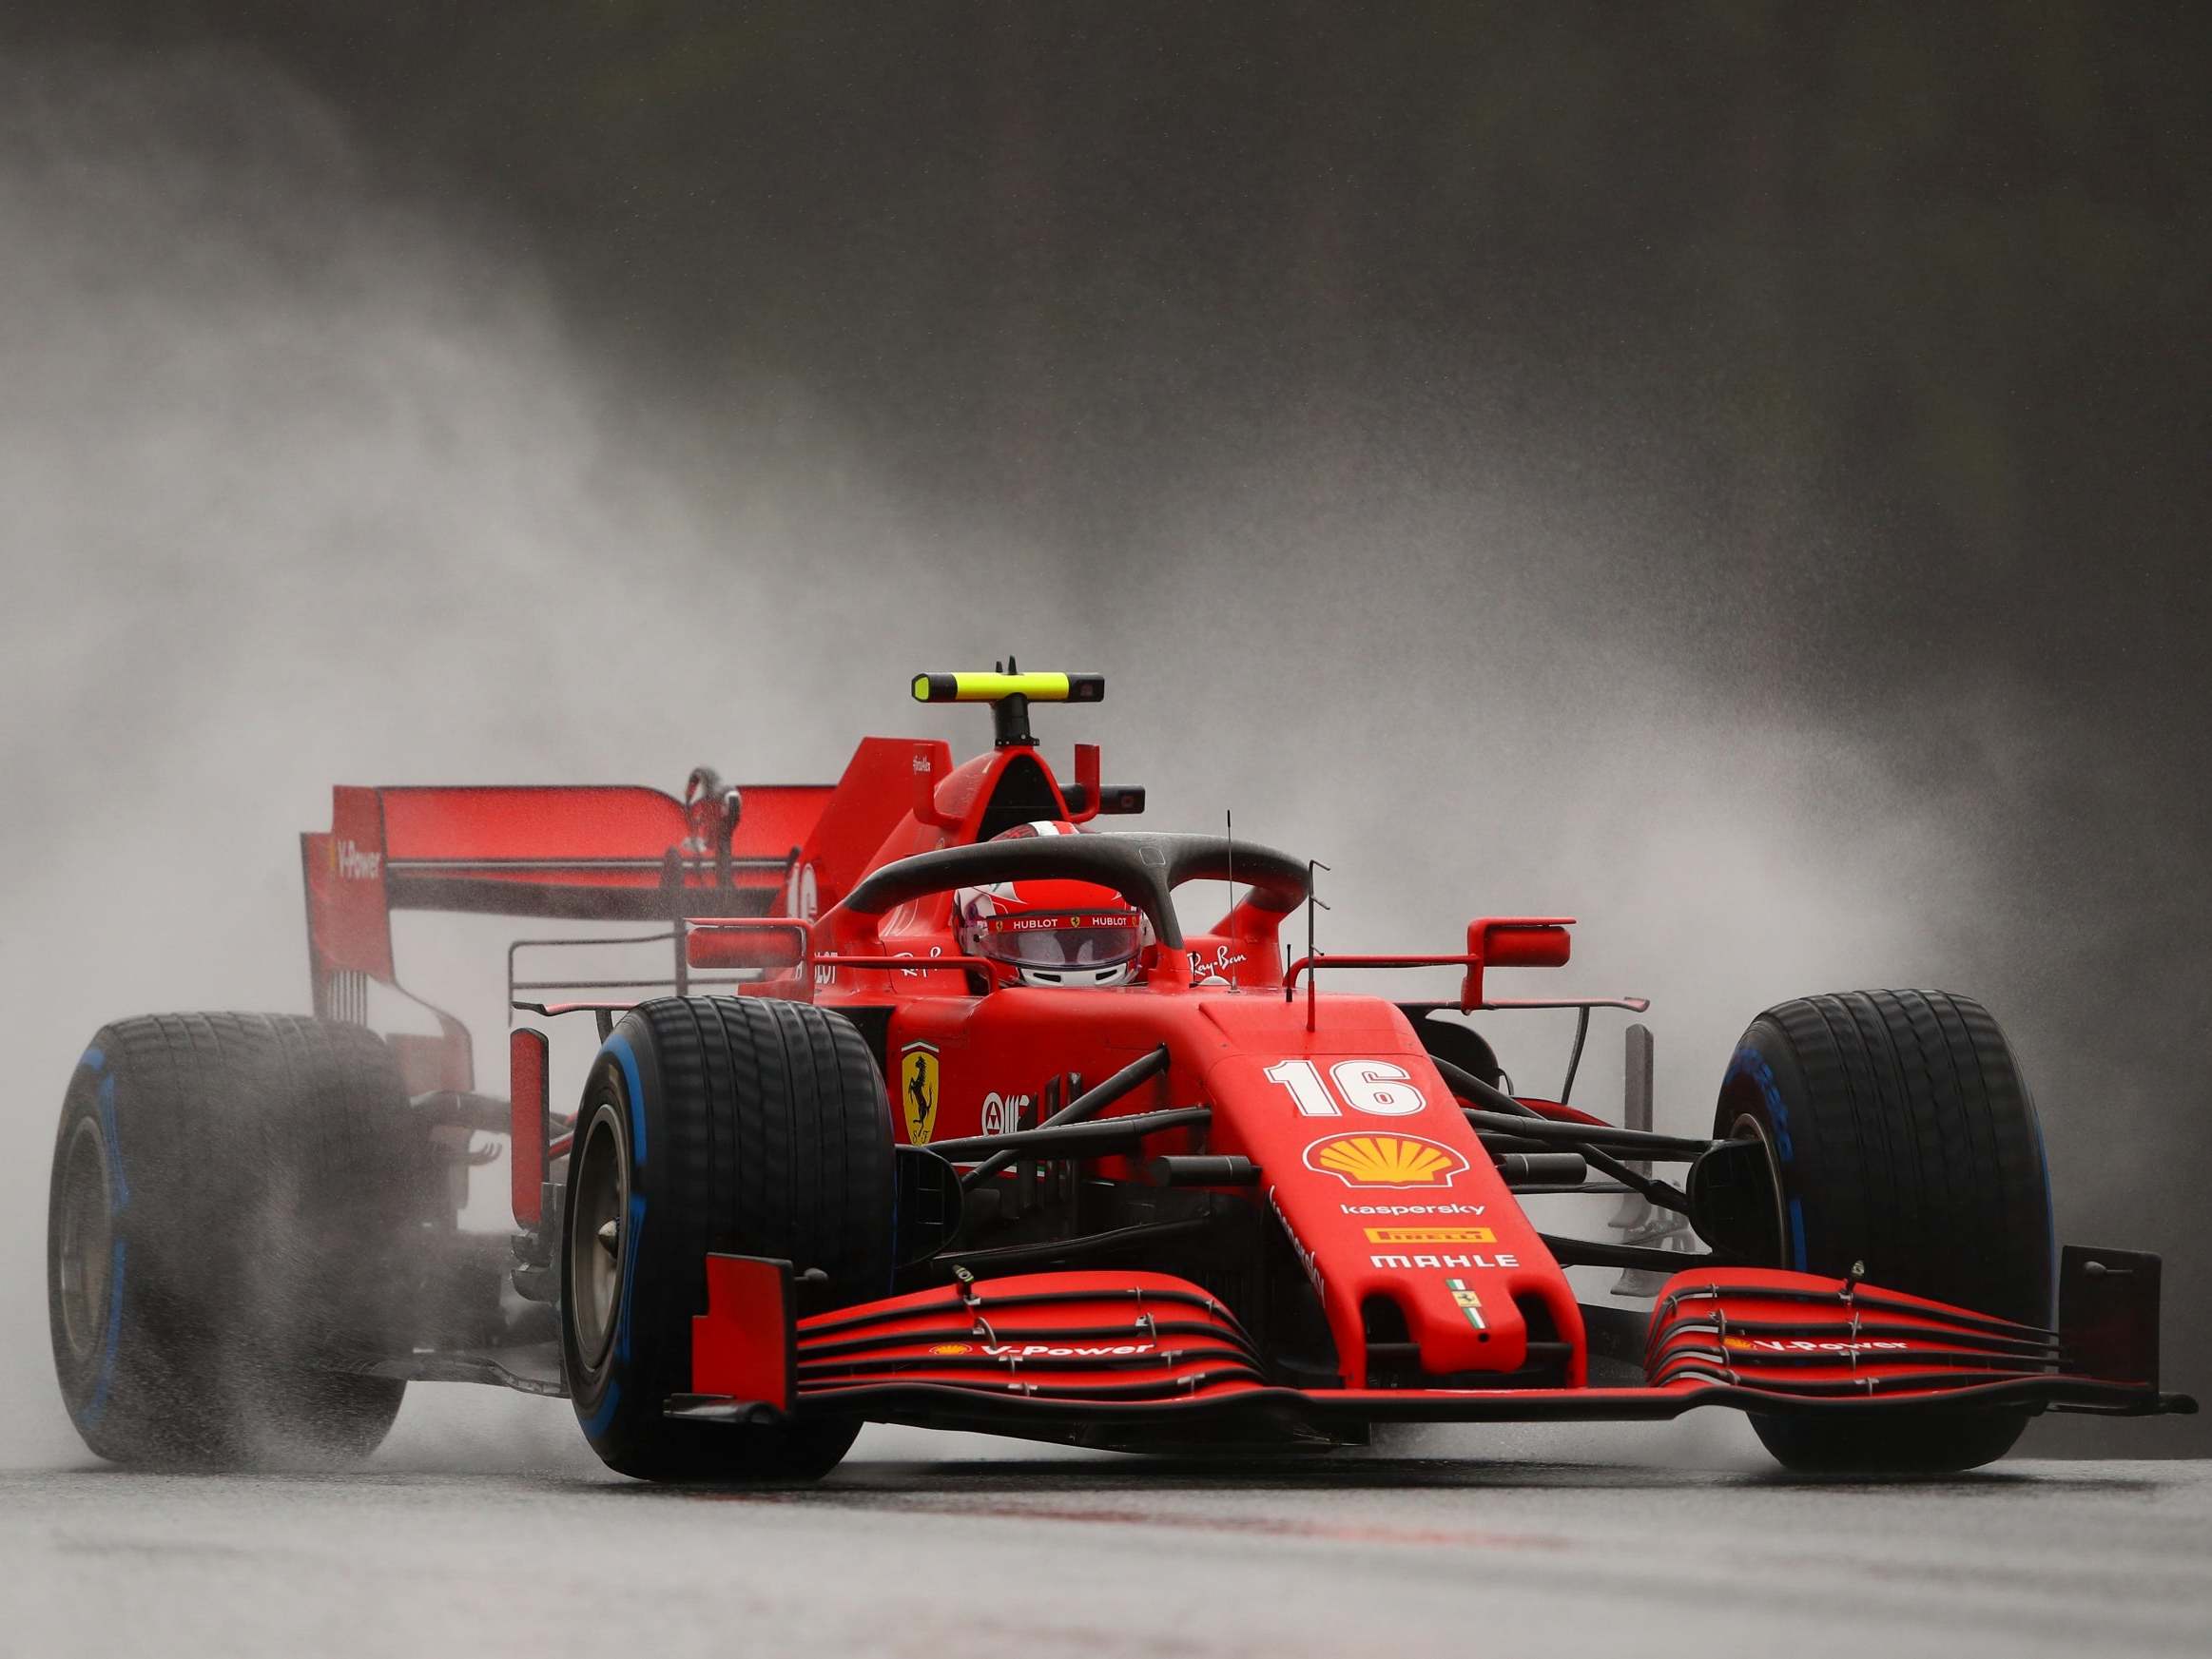 Styrian Grand Prix: Charles Leclerc under double-investigation following qualifying to add to Ferrari woes